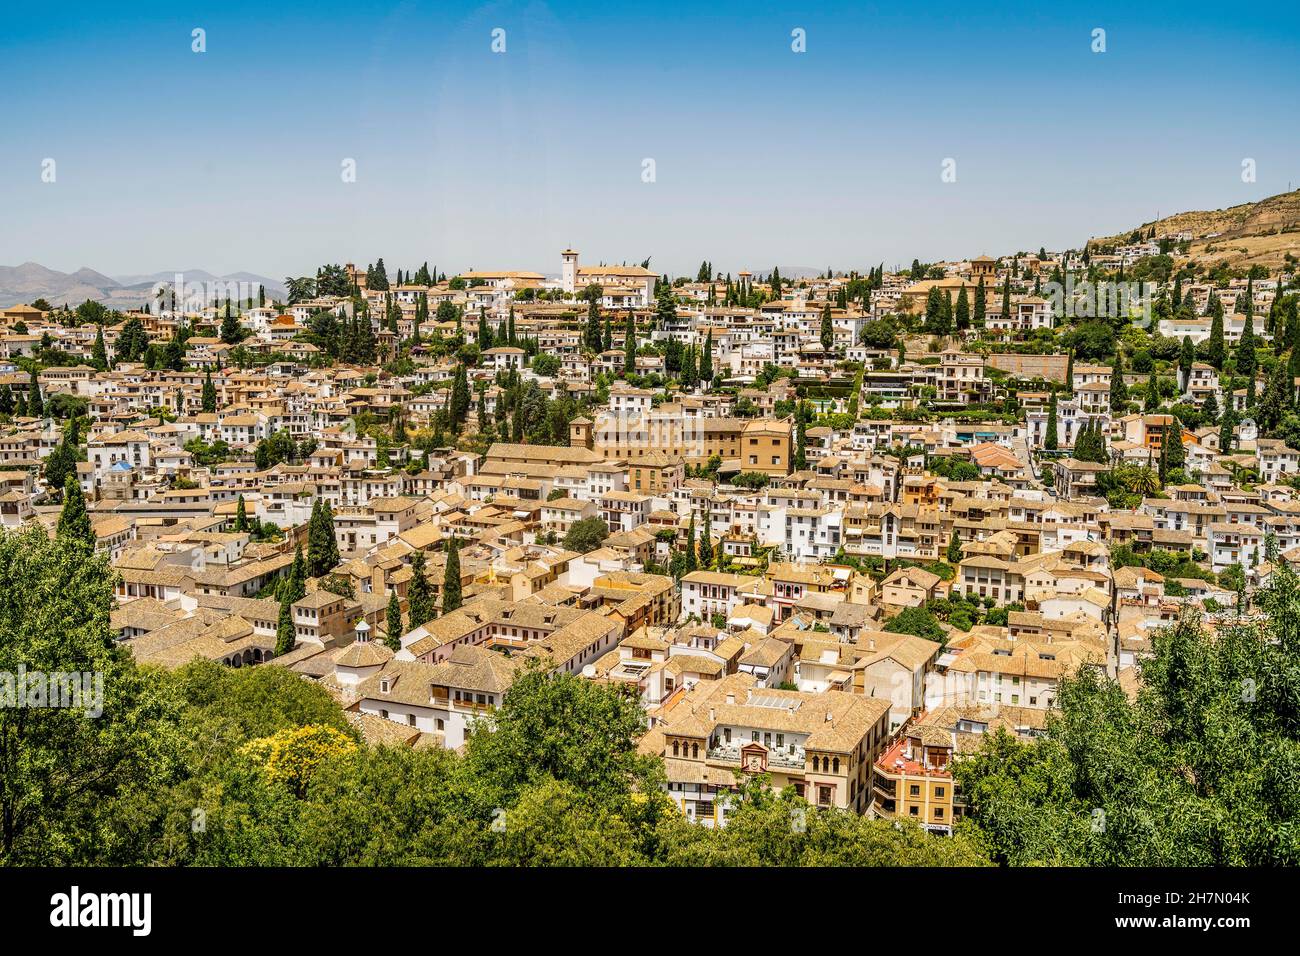 Historic Granada cityscape viewed from Alhambra palaces complex, Andalusia, Spain Stock Photo